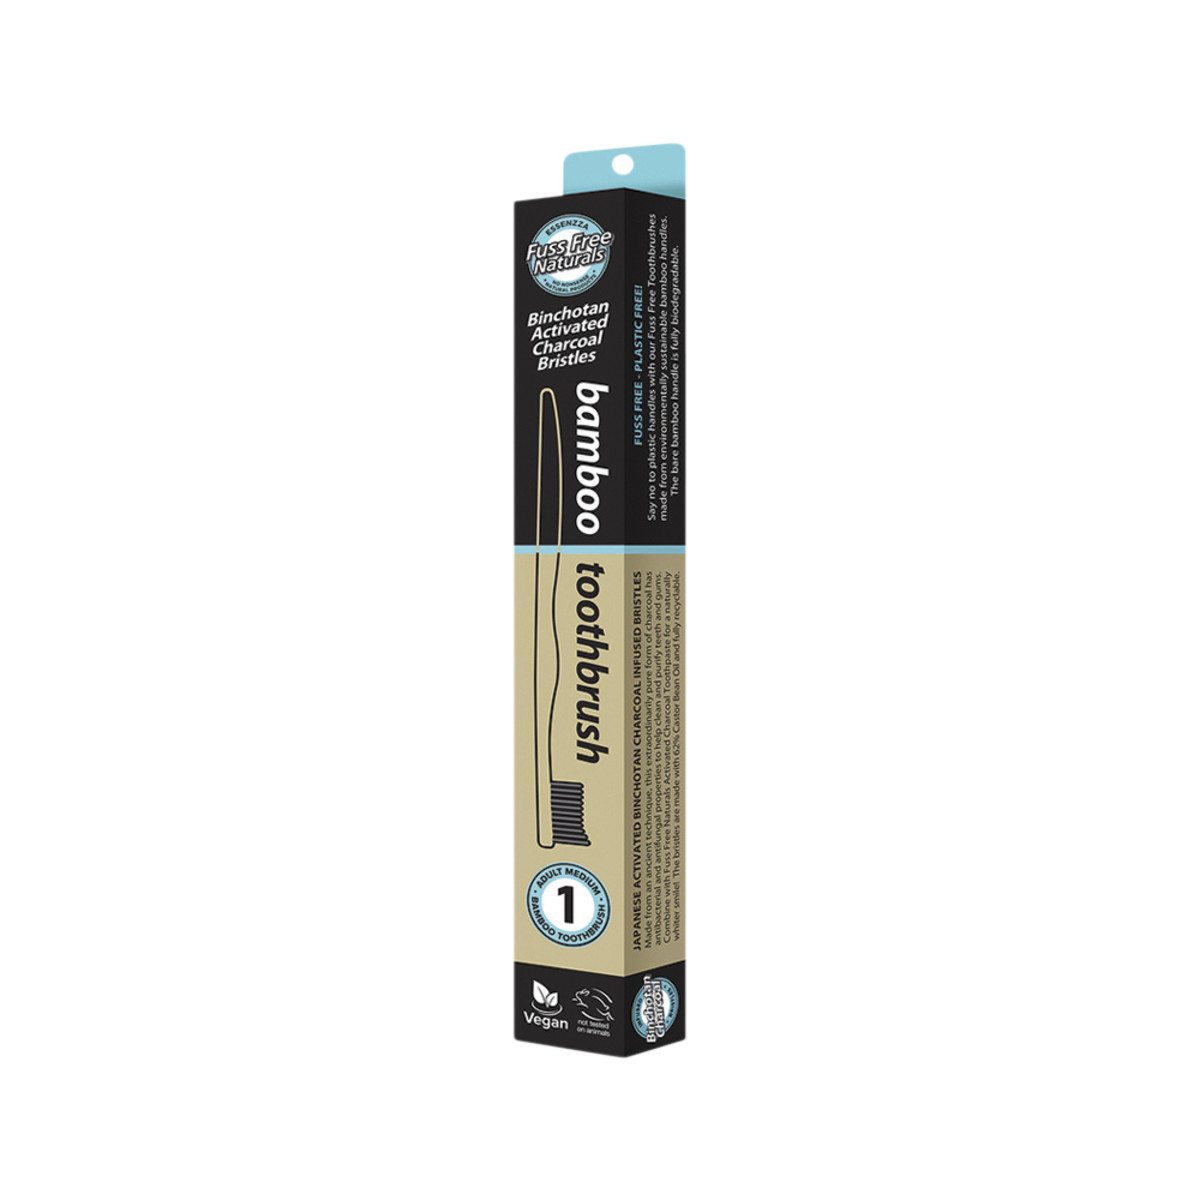 ESSENZZA FUSS FREE NATURALS - Toothbrush Bamboo Activated Charcoal Medium